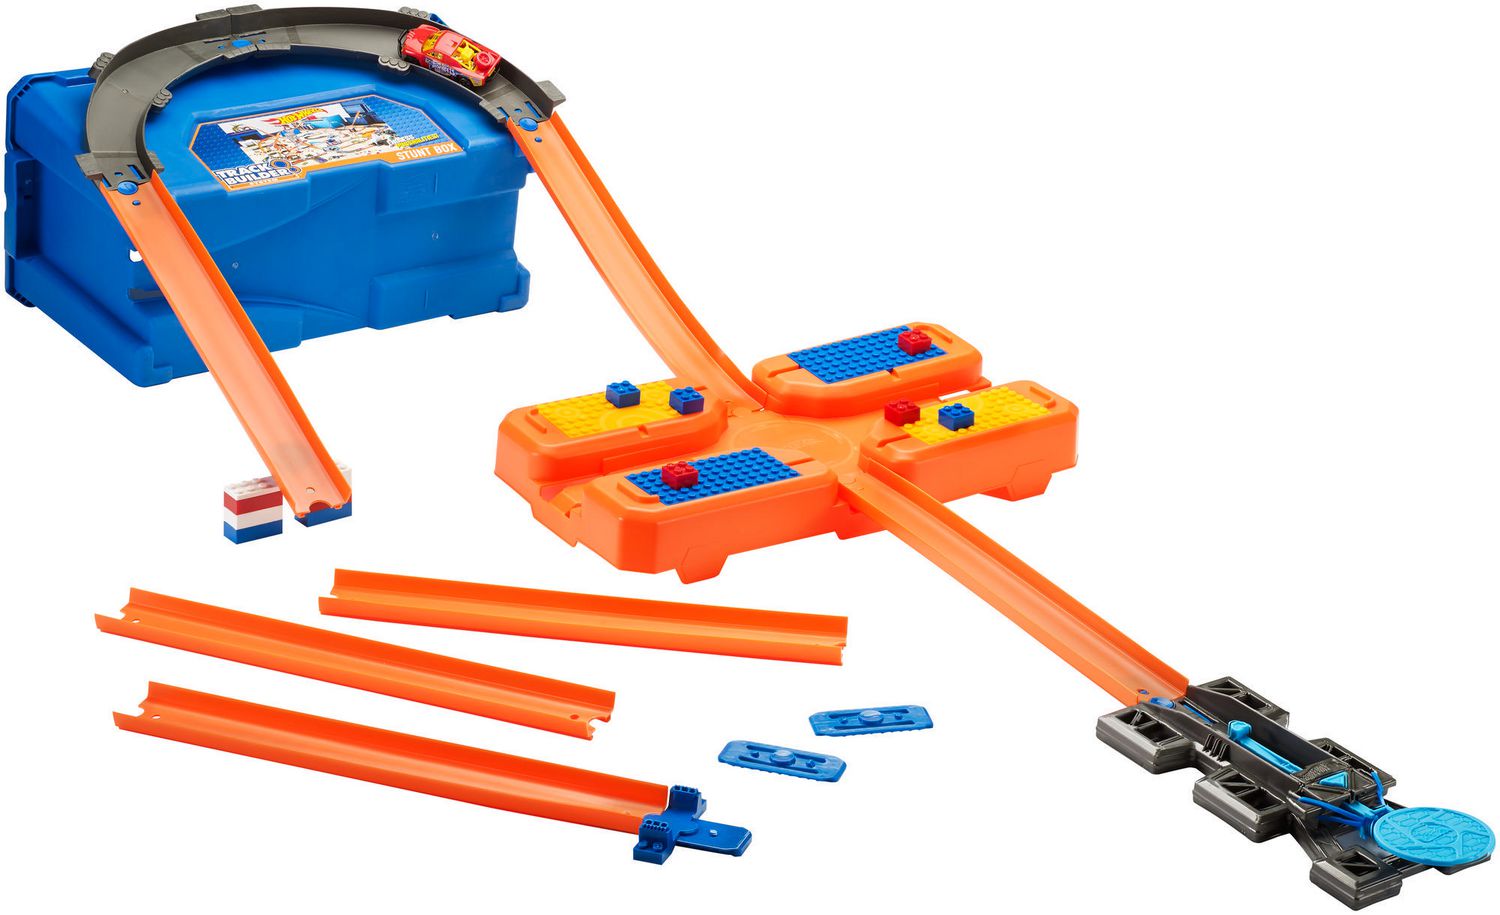 mattel hot wheels track builder track and brick pack playset